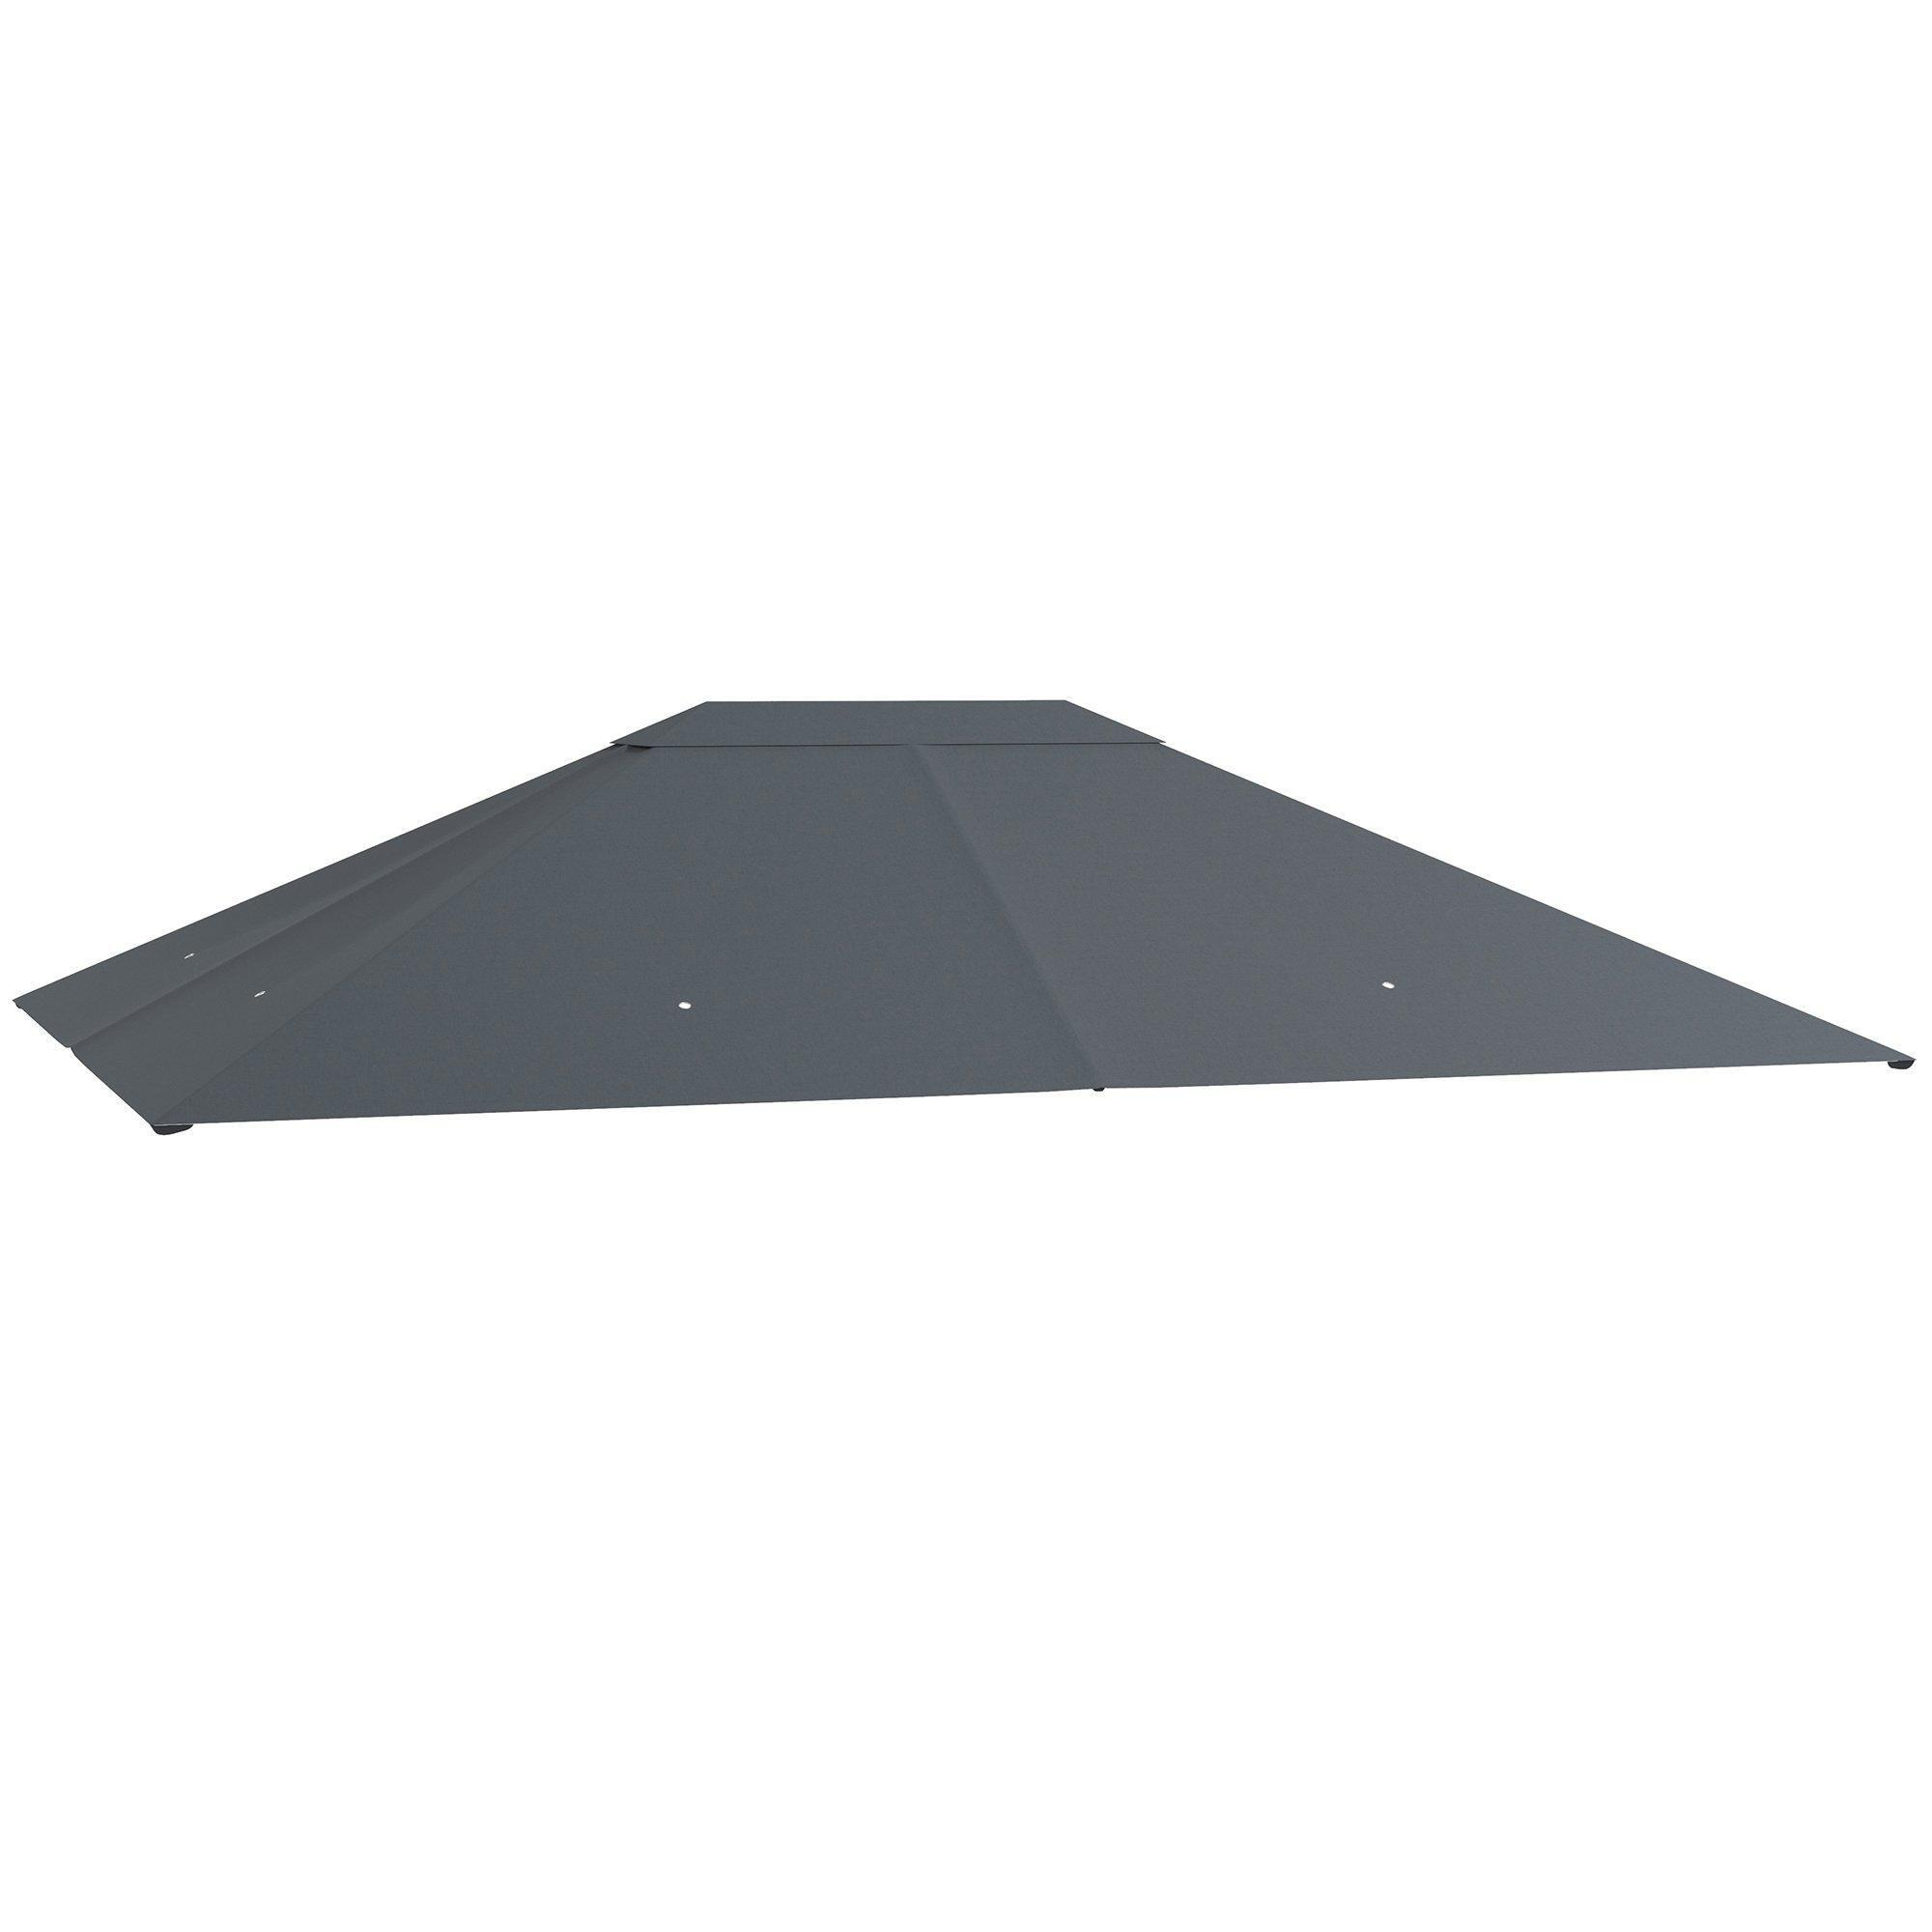 3 x 4m Gazebo Replacement Canopy Cover Gazebo Roof Replacement - image 1